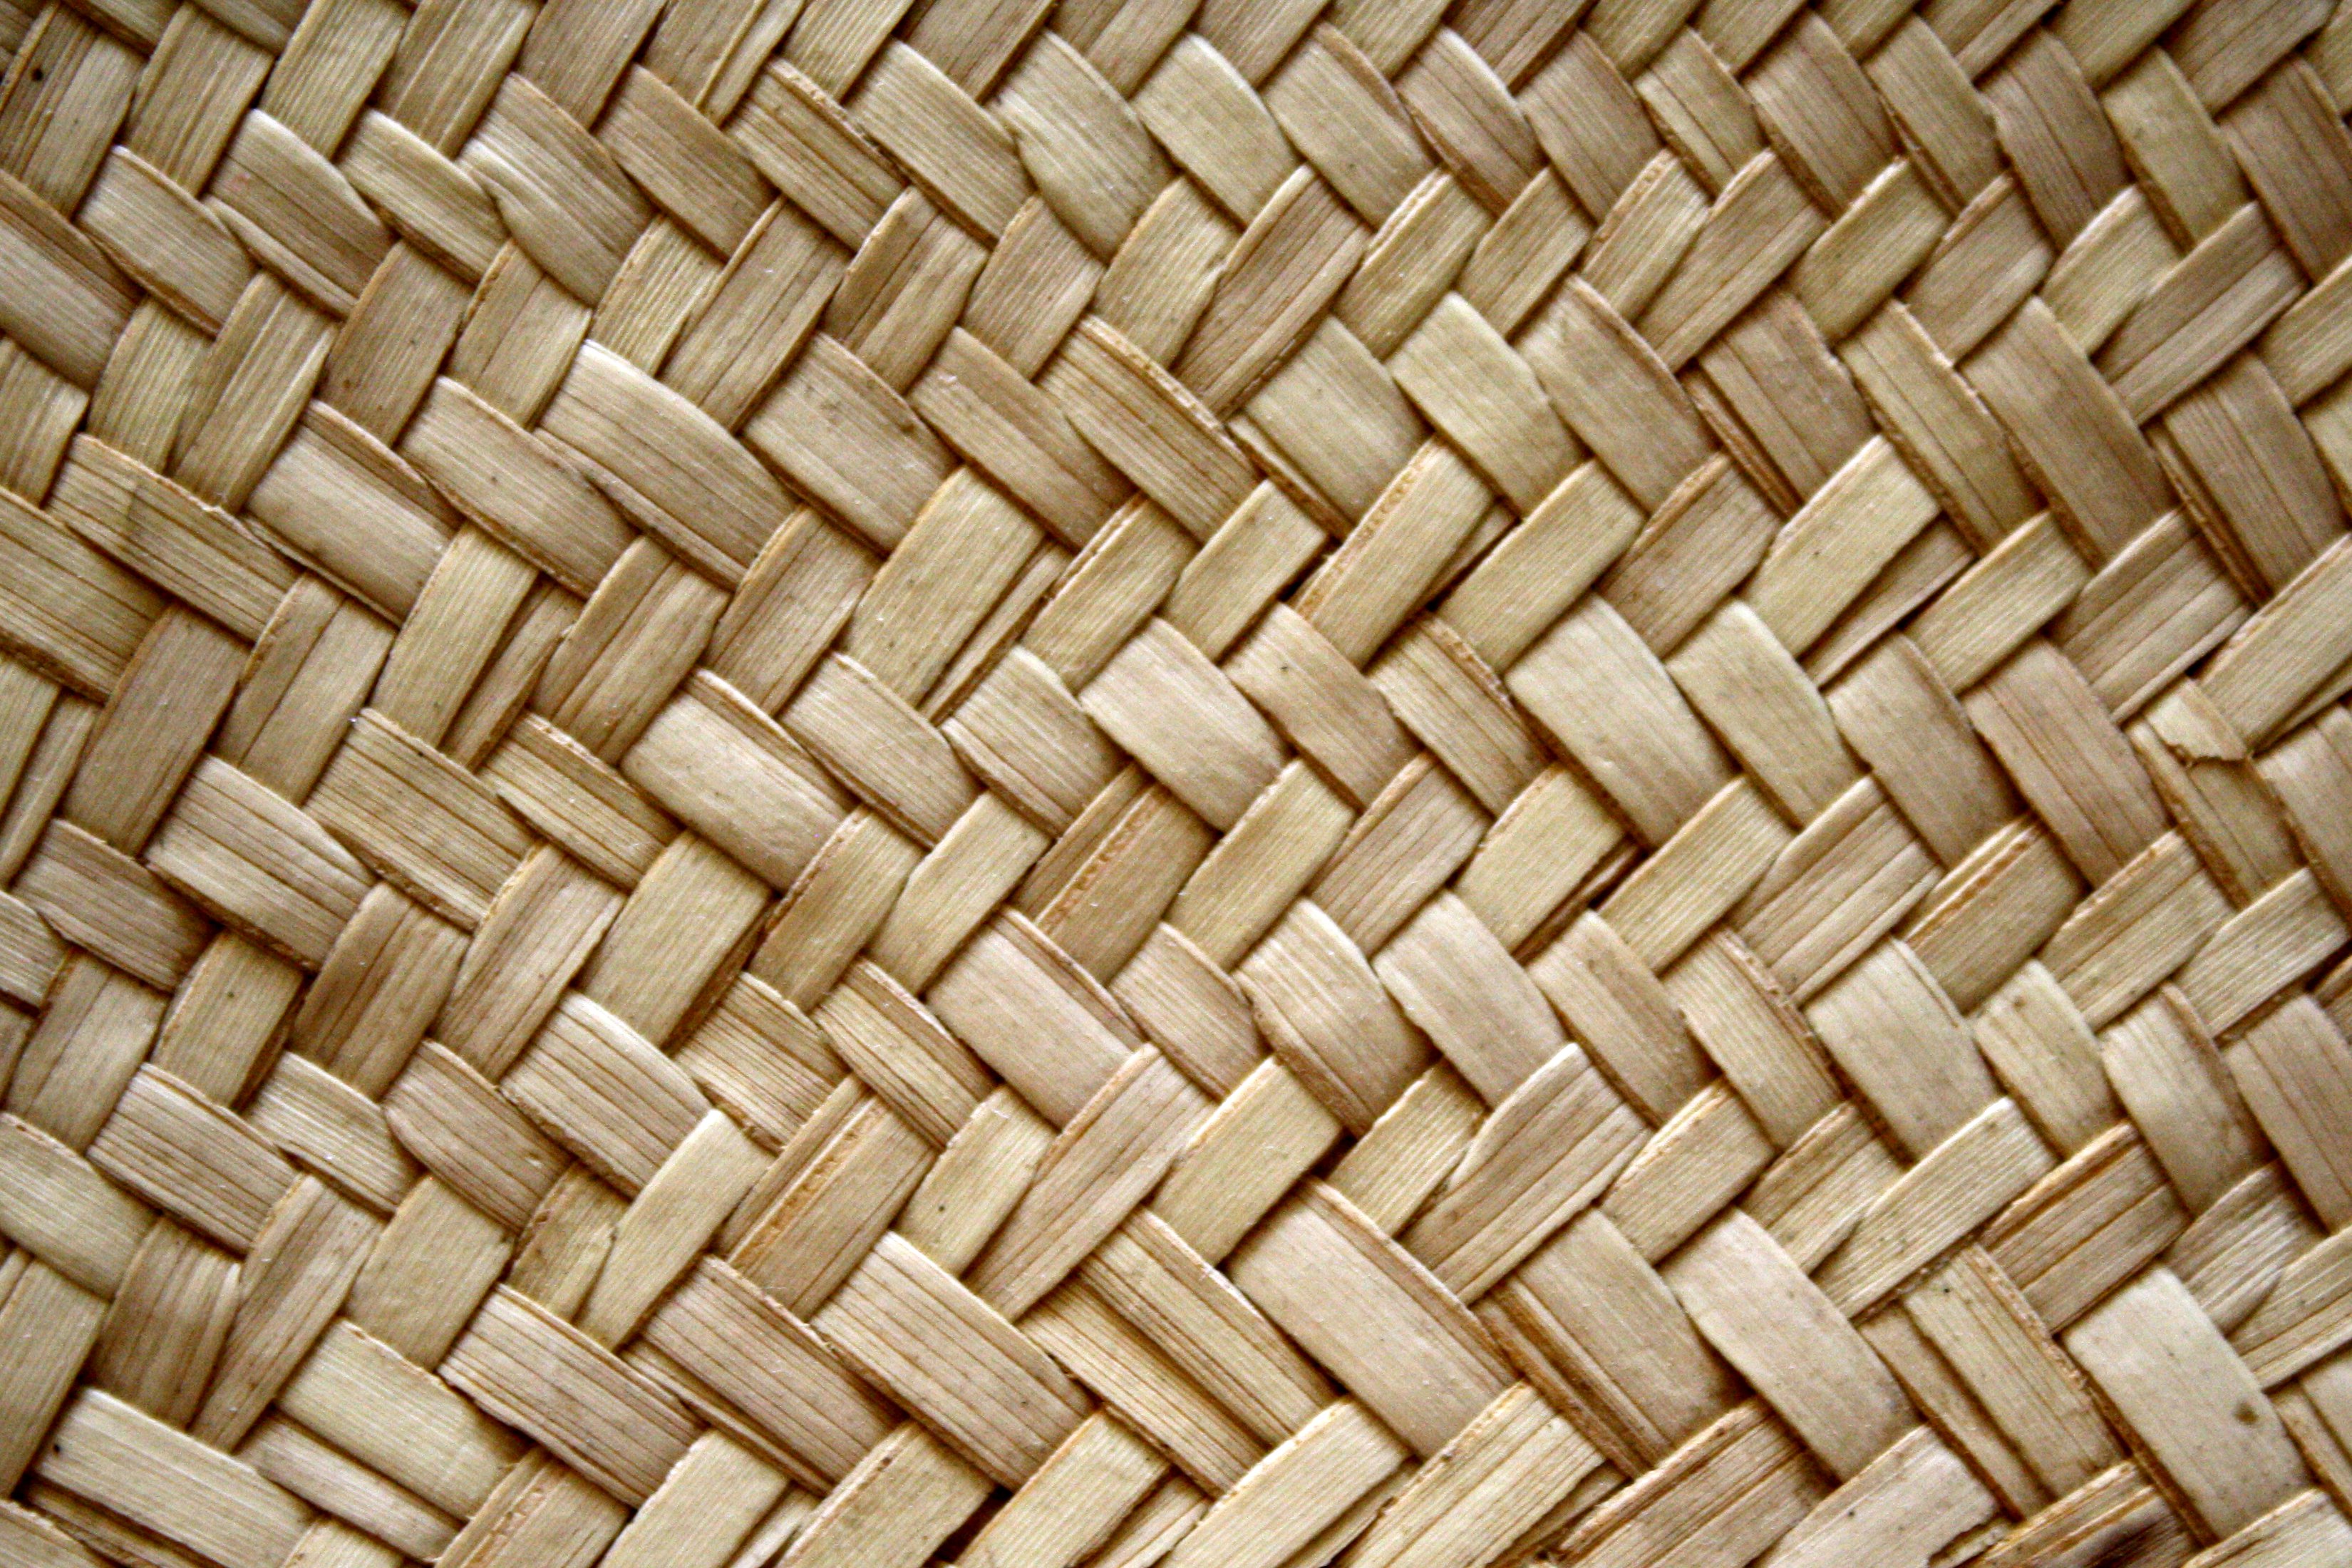 Woven Straw Texture High Resolution Photo Dimensions